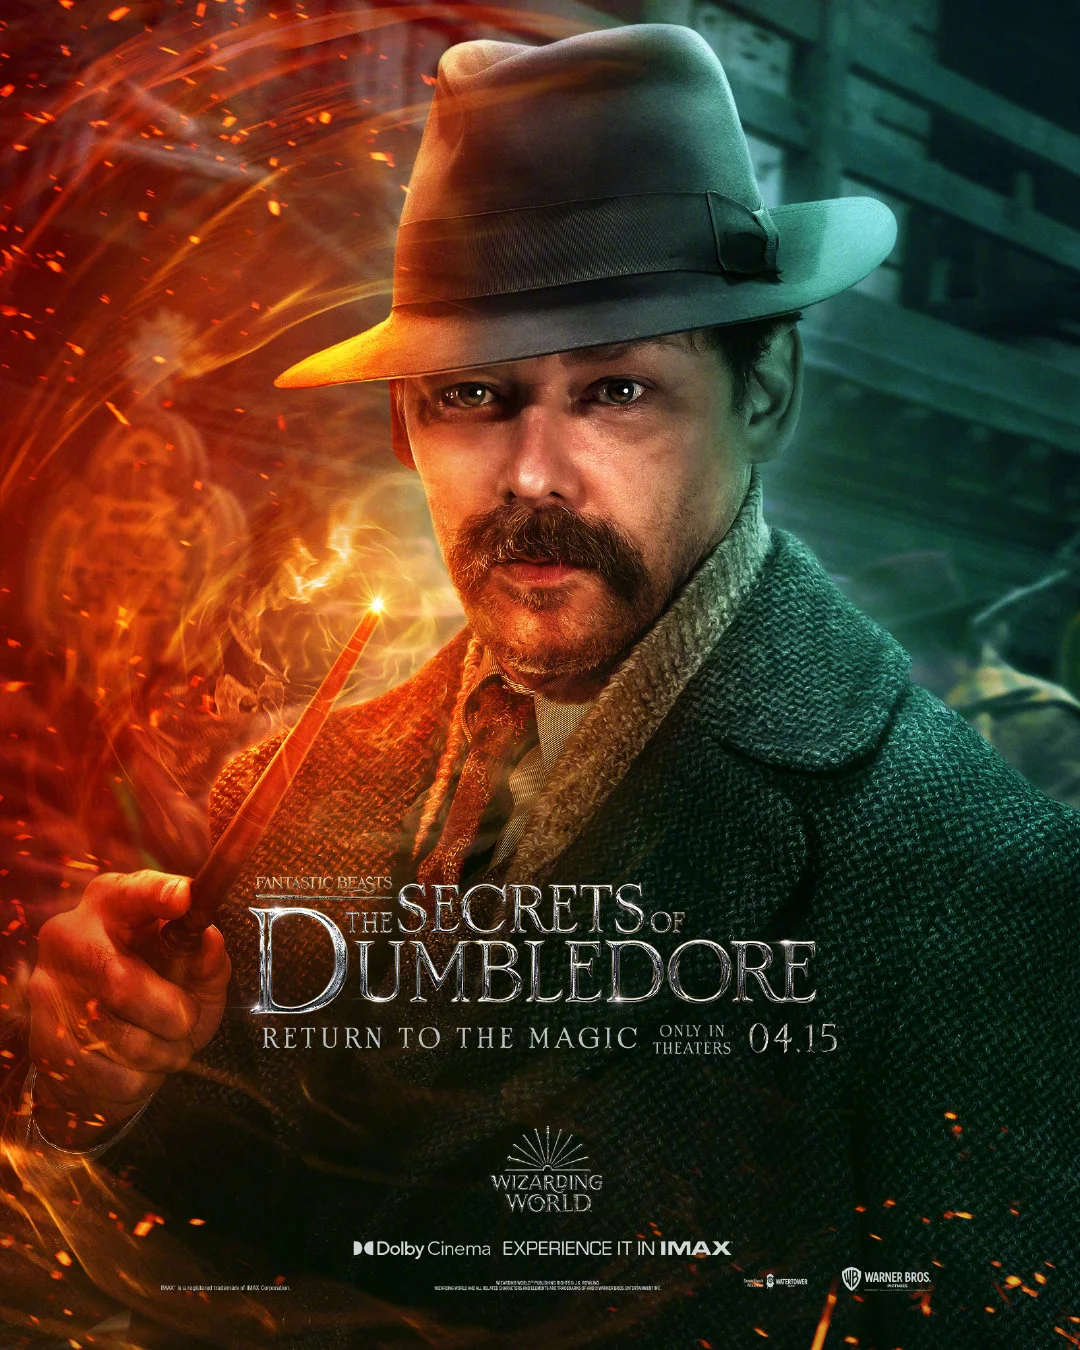 fantastic-beasts-the-secrets-of-dumbledore-releases-multiple-character-posters-10